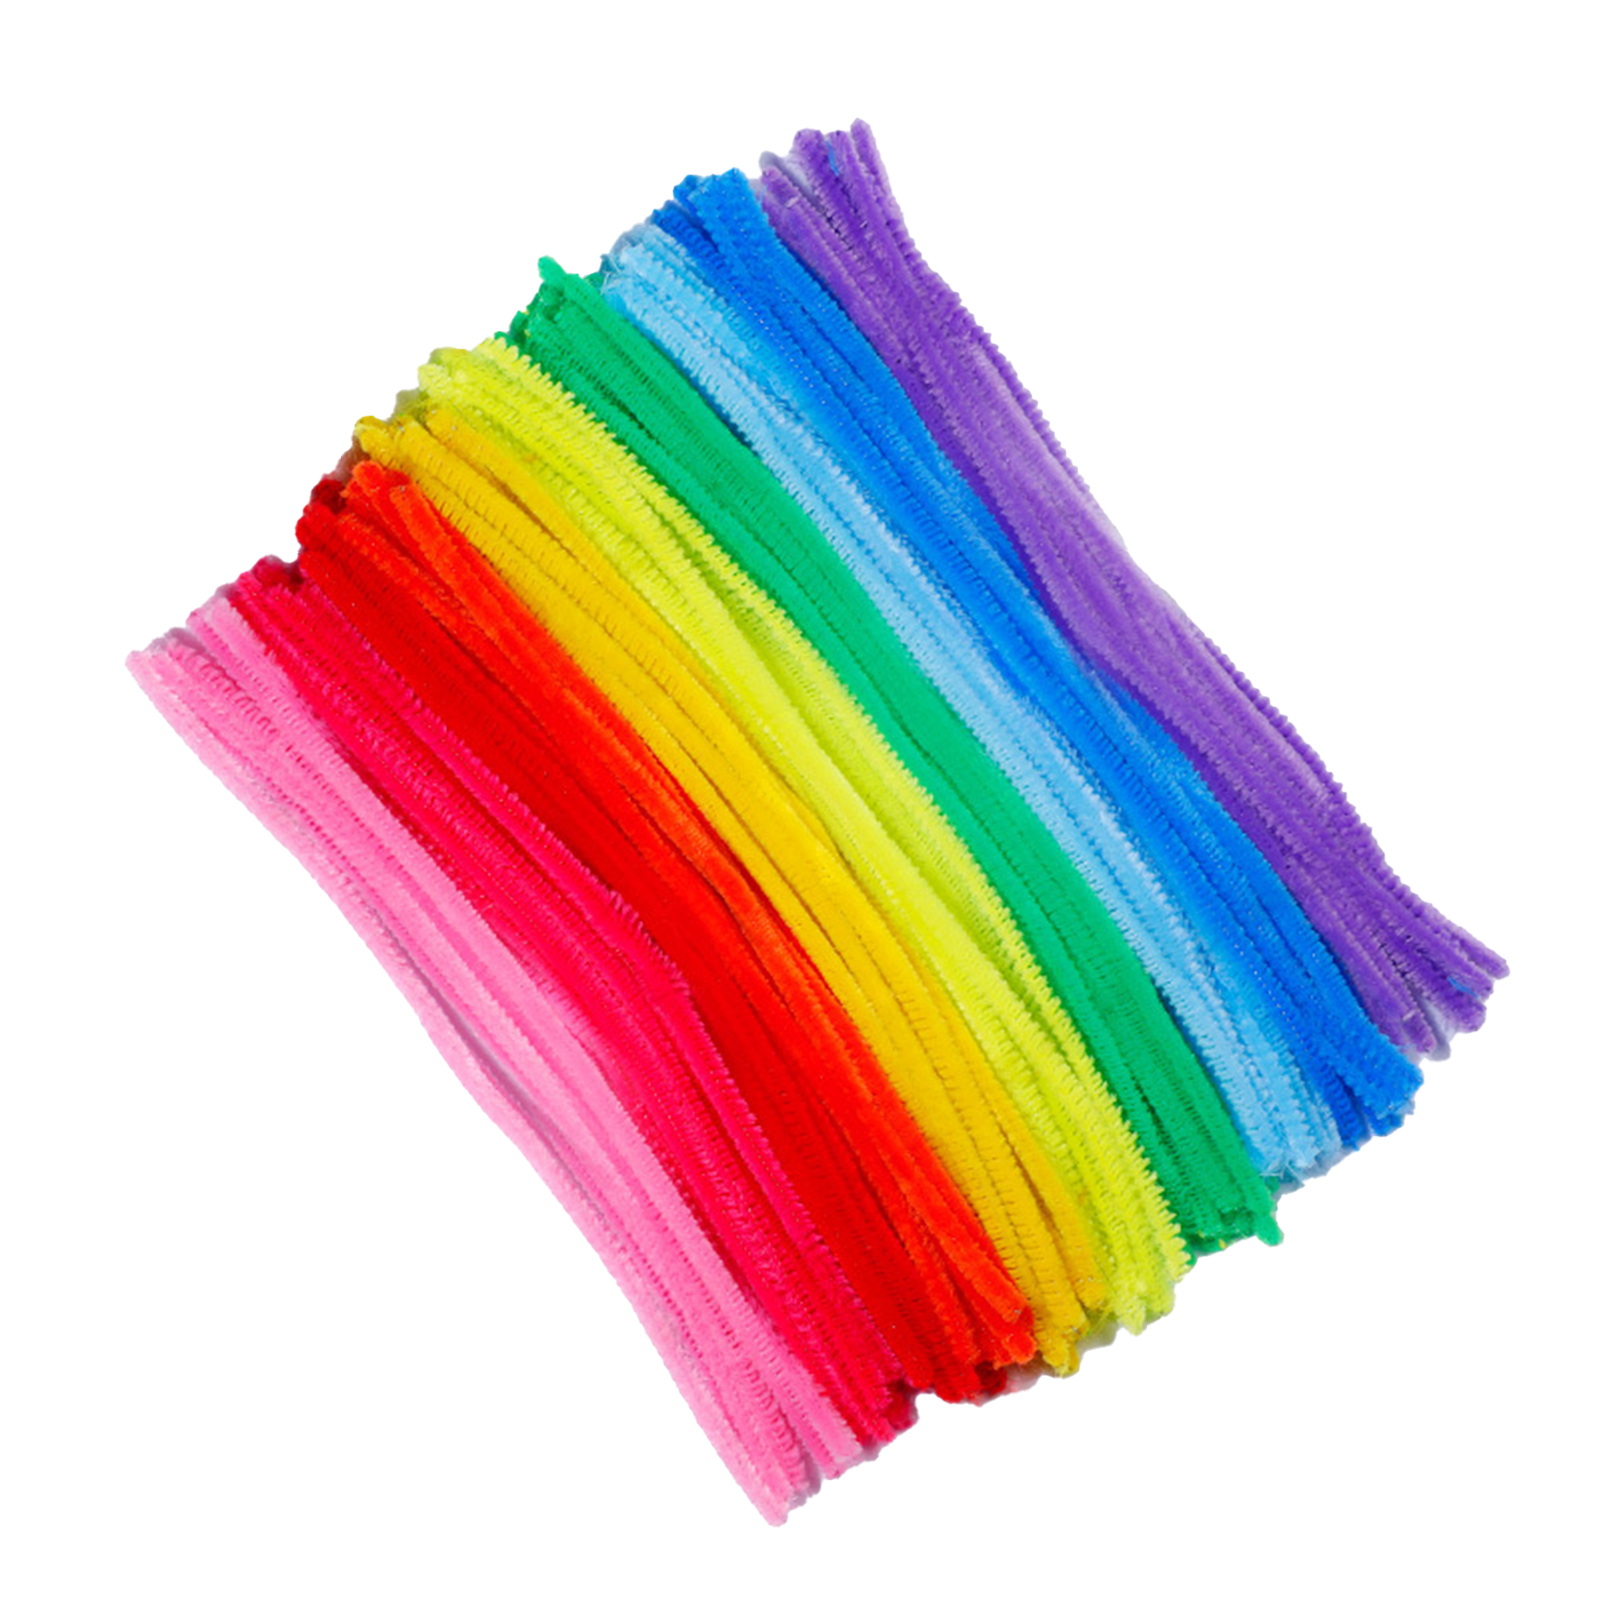 microgood 100Pcs Multiple Color Pipe Cleaners Craft Kit Flexible Bendable